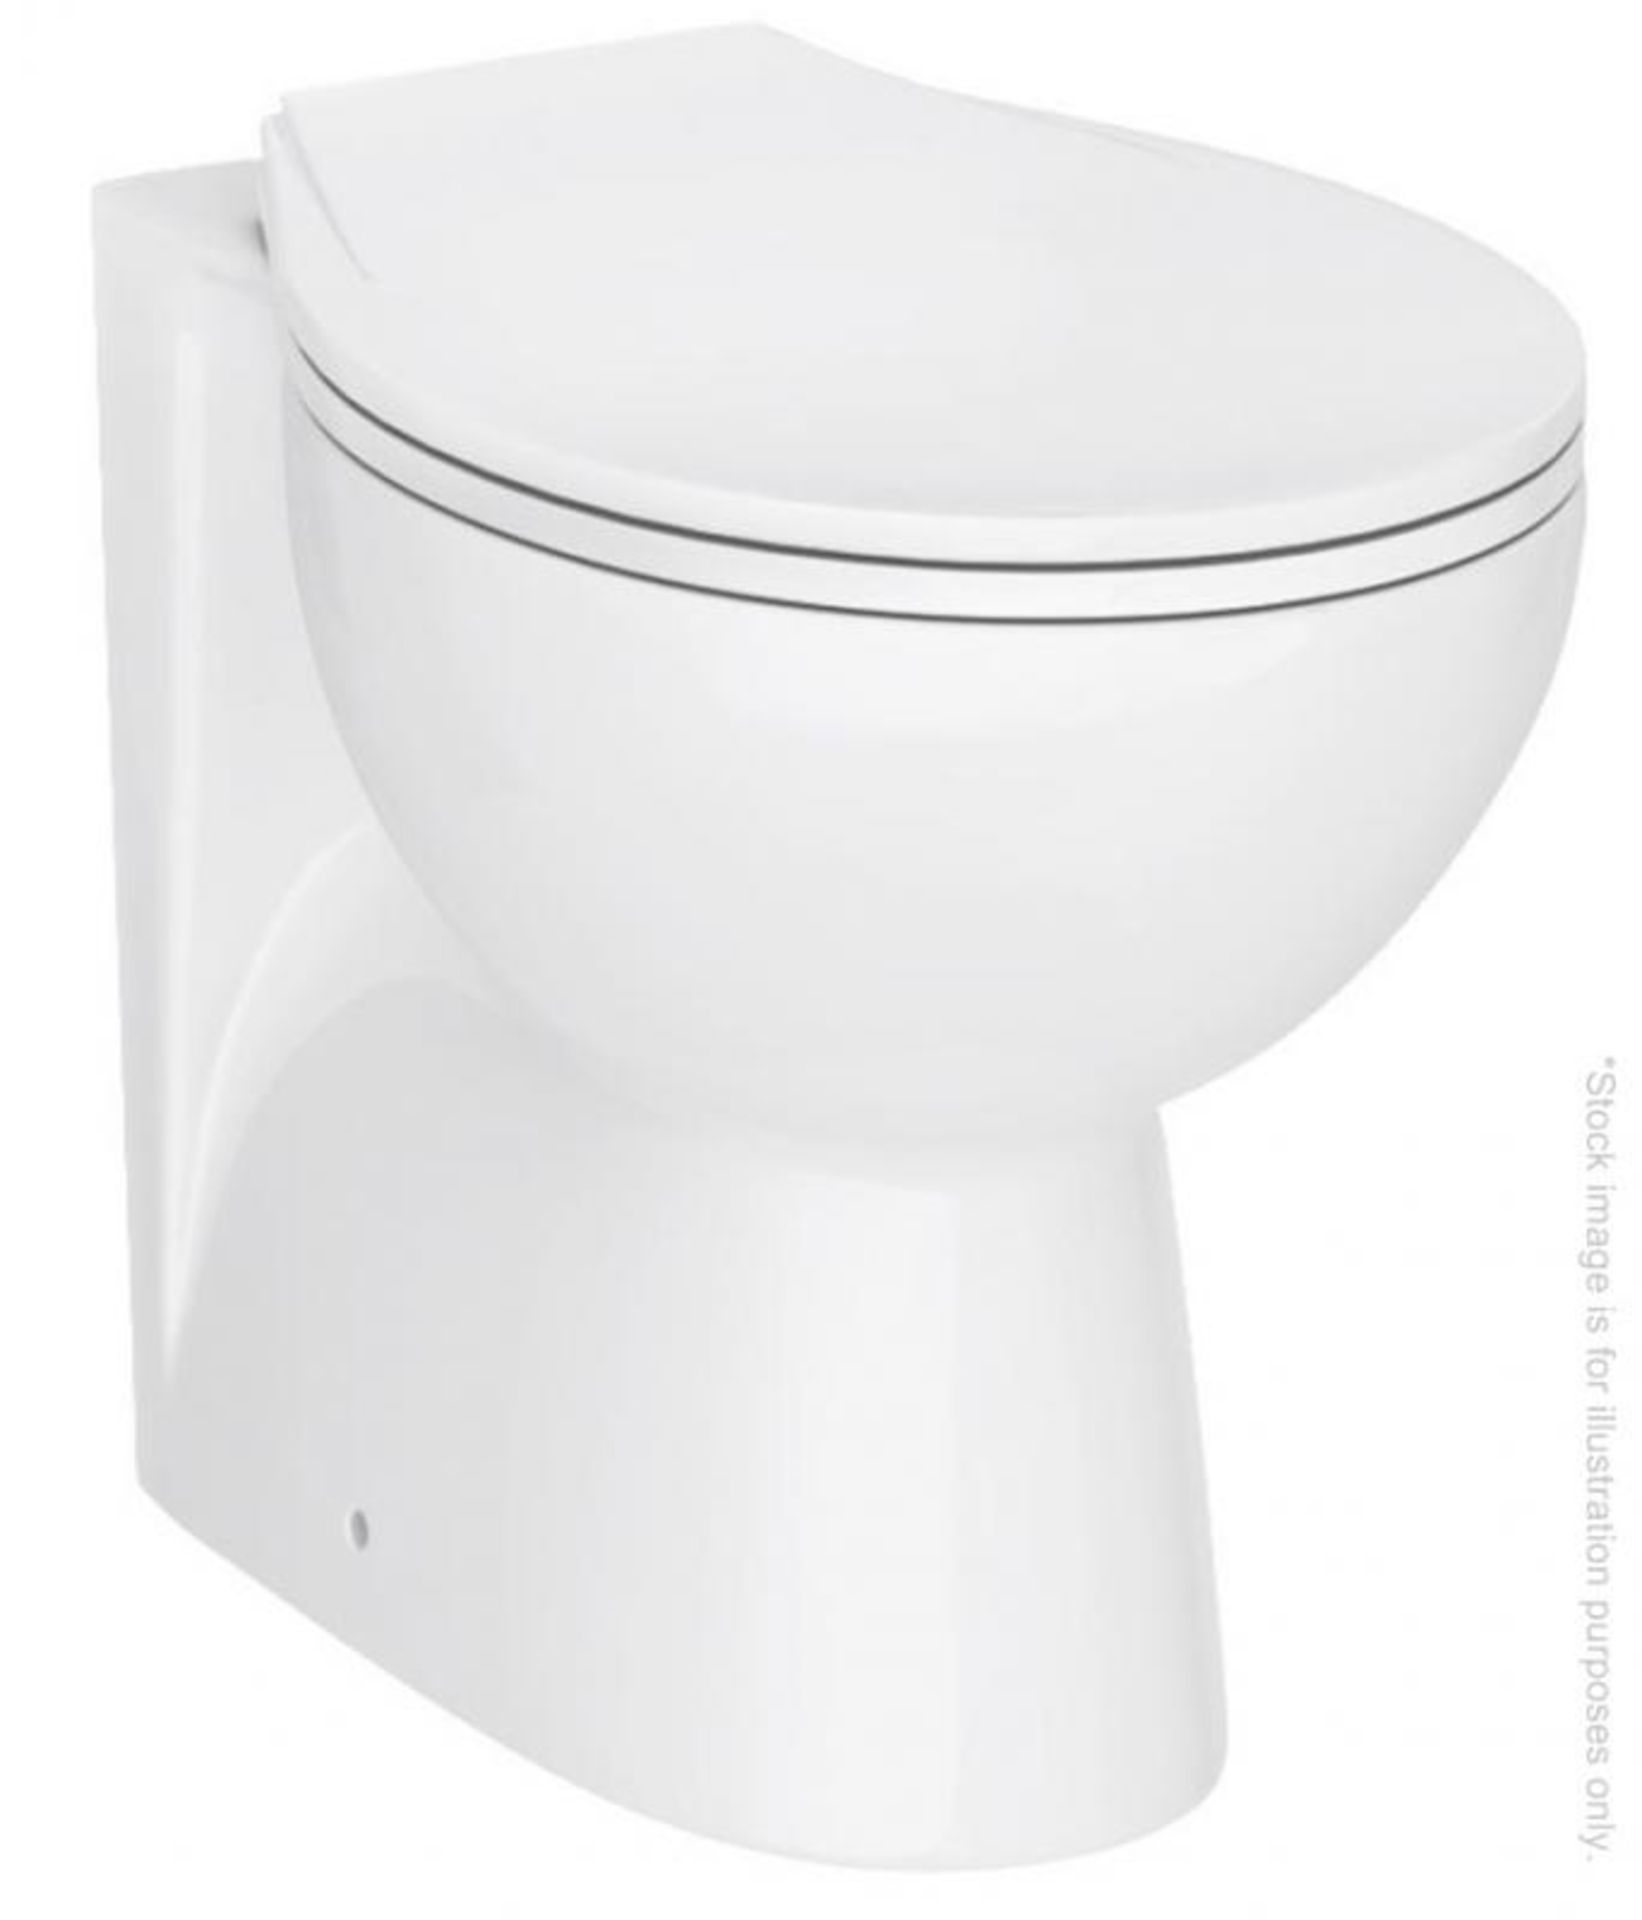 1 x Standard Ceramic Back to Wall Toilet Pan - BTW002 - New & Boxed Stock - CL406 - Location: Bolton